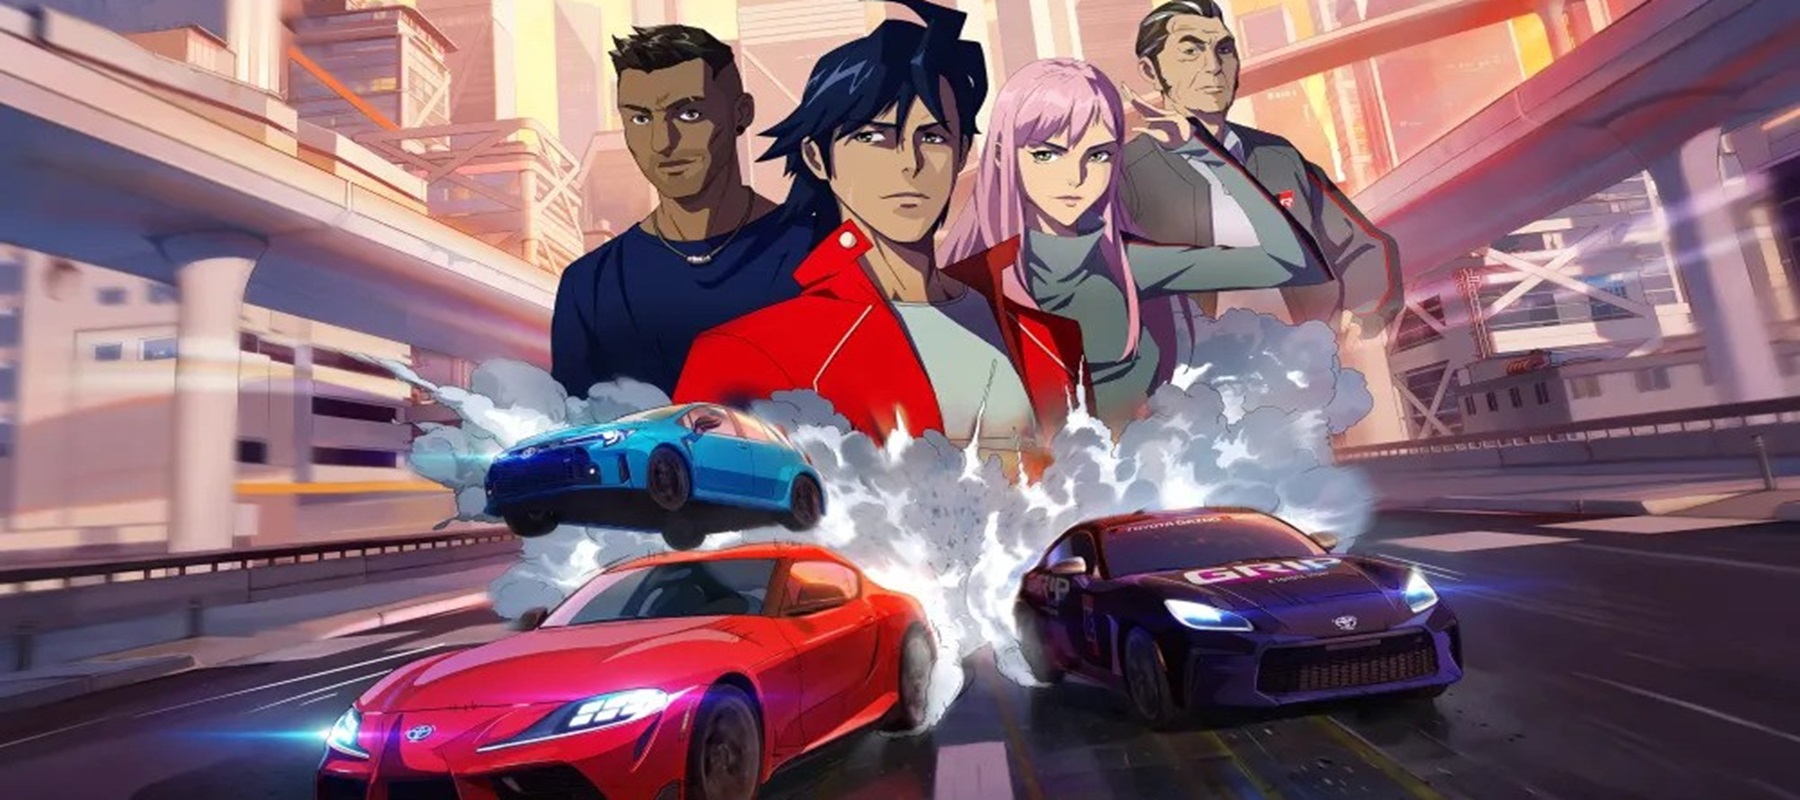 Creative ad agency Intertrend creates Toyota’s first-ever anime content series in new campaign